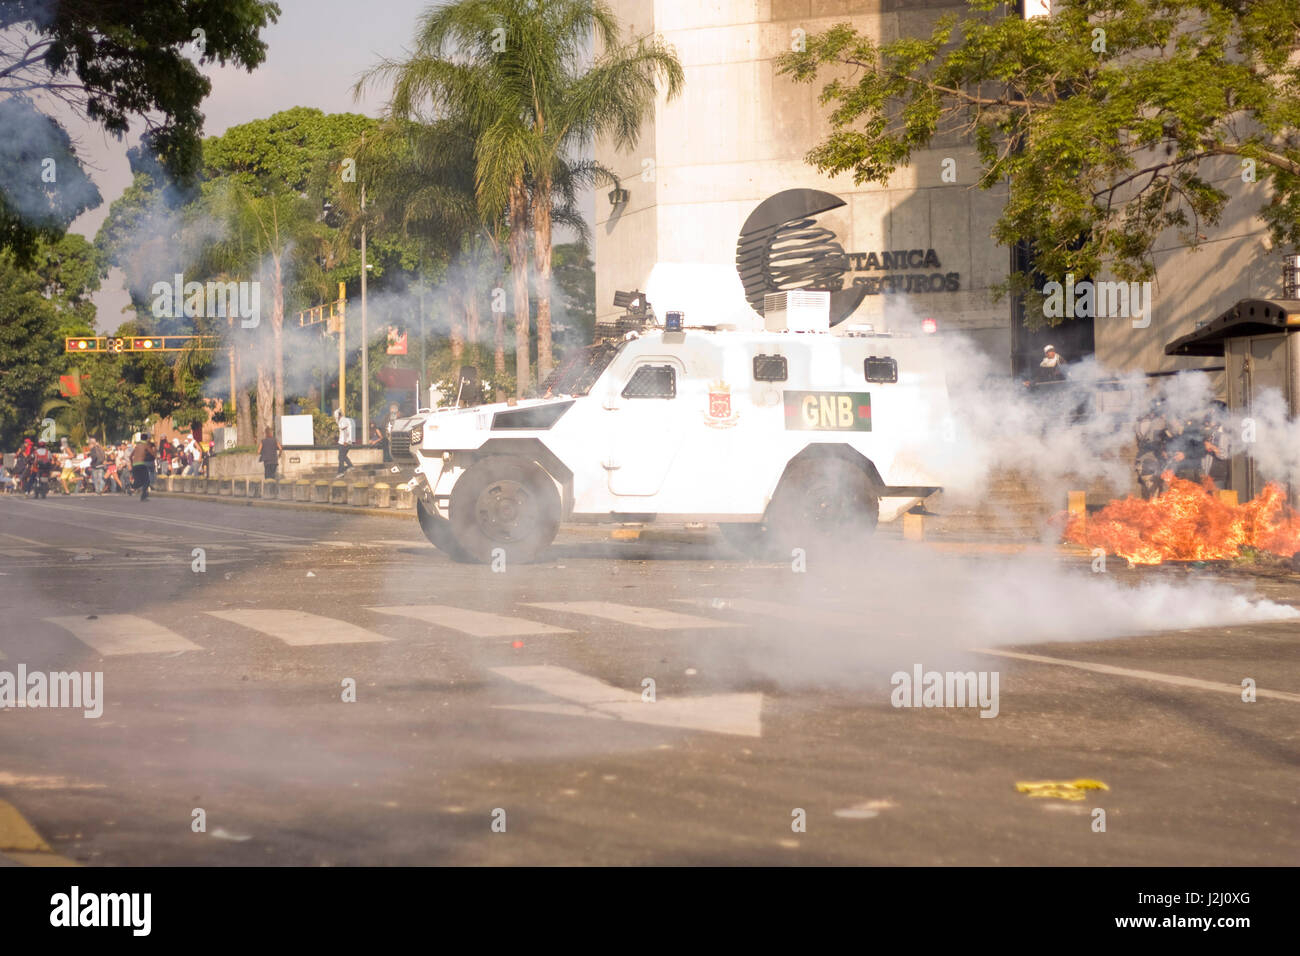 An armor vehicle is attacked with a molotov cocktail during a protest. Stock Photo